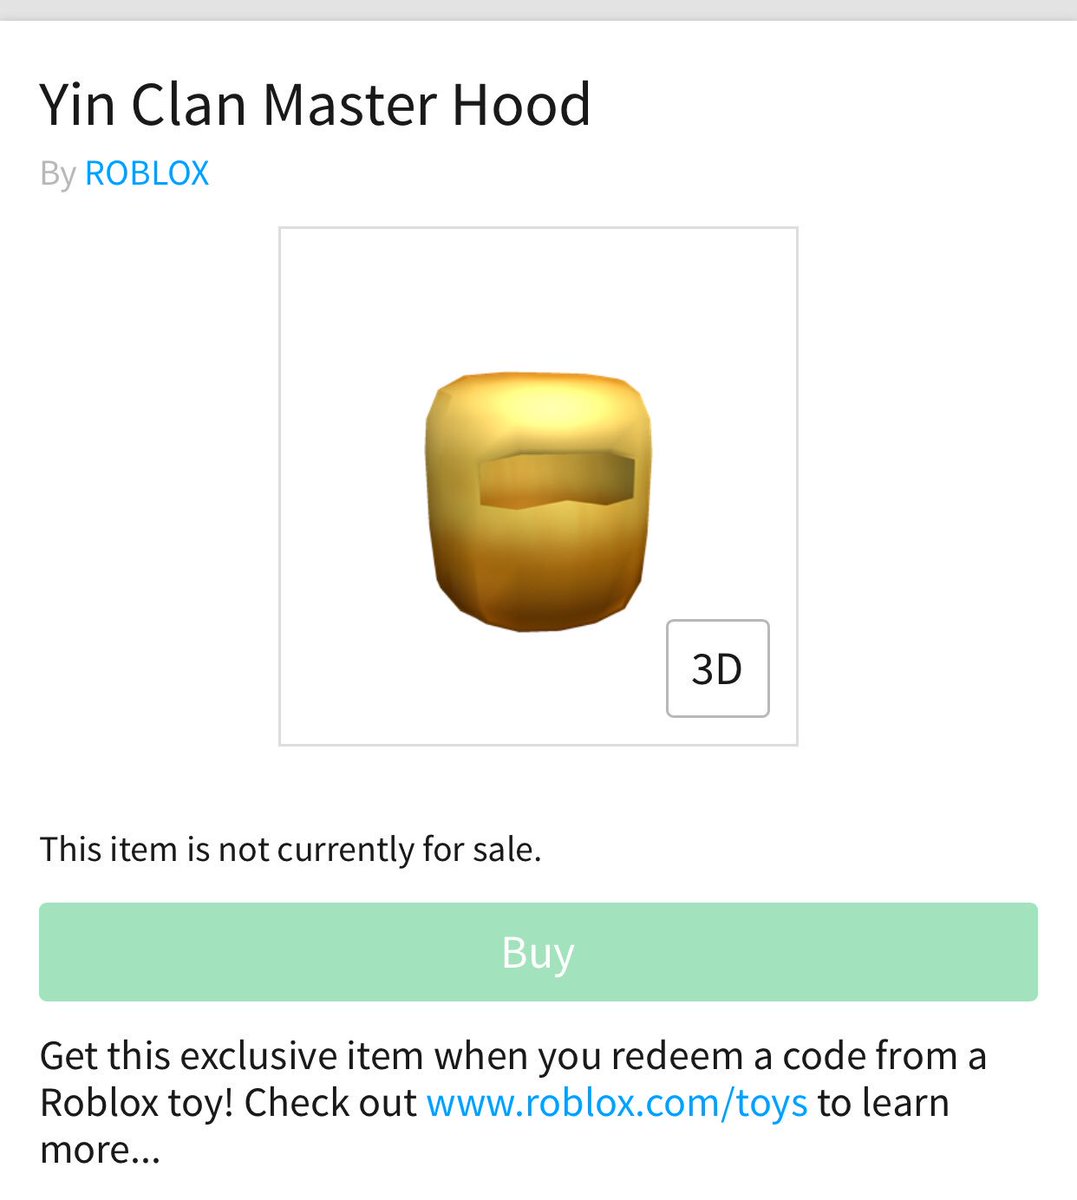 Discountflipper Lord Workclock On Twitter Selling 1 Of These Toy Codes Might Giveaway The Rest Rt To Spread The Word - yin clan master hood roblox